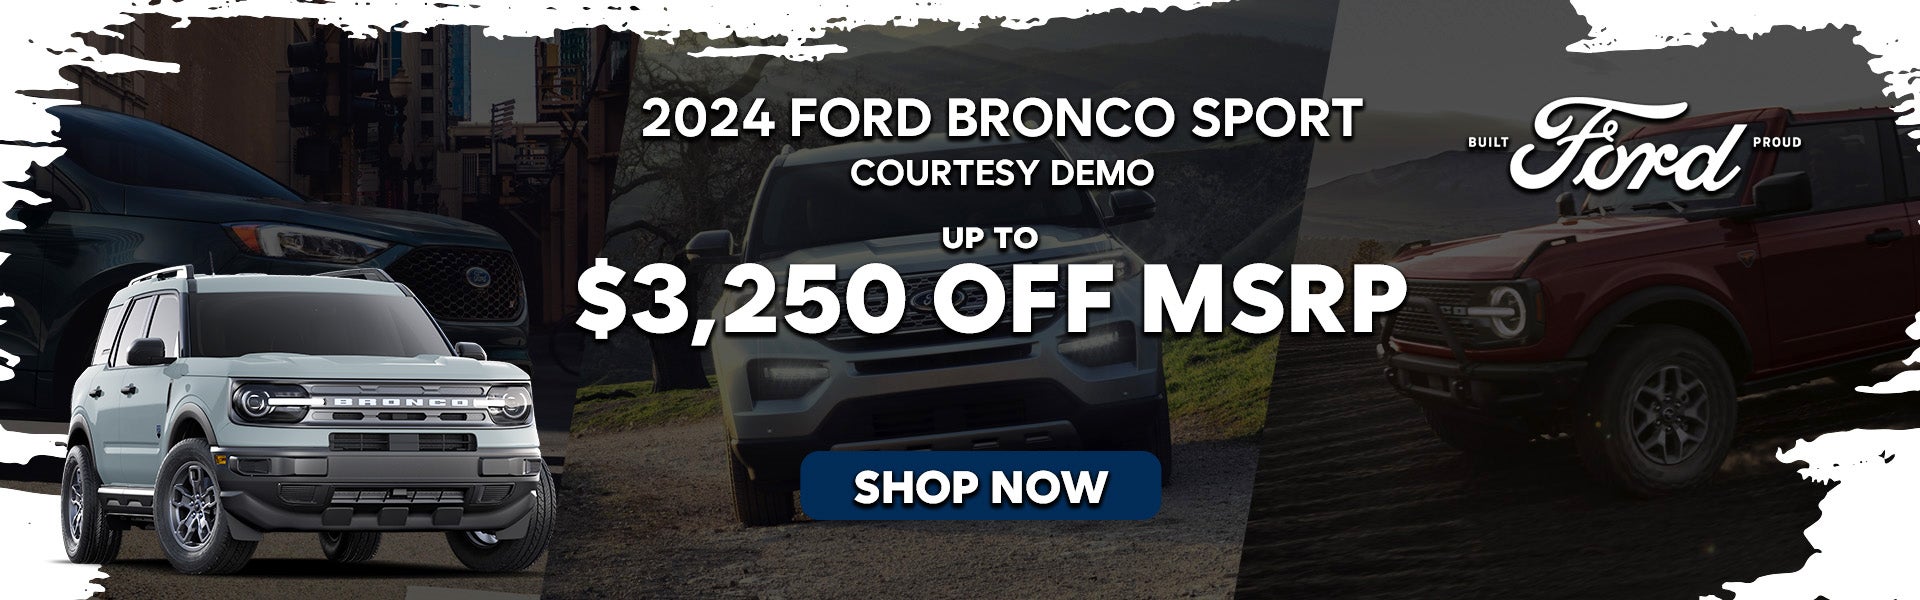 2024 Ford Bronco Sport Courtesy Vehicle Special Offer